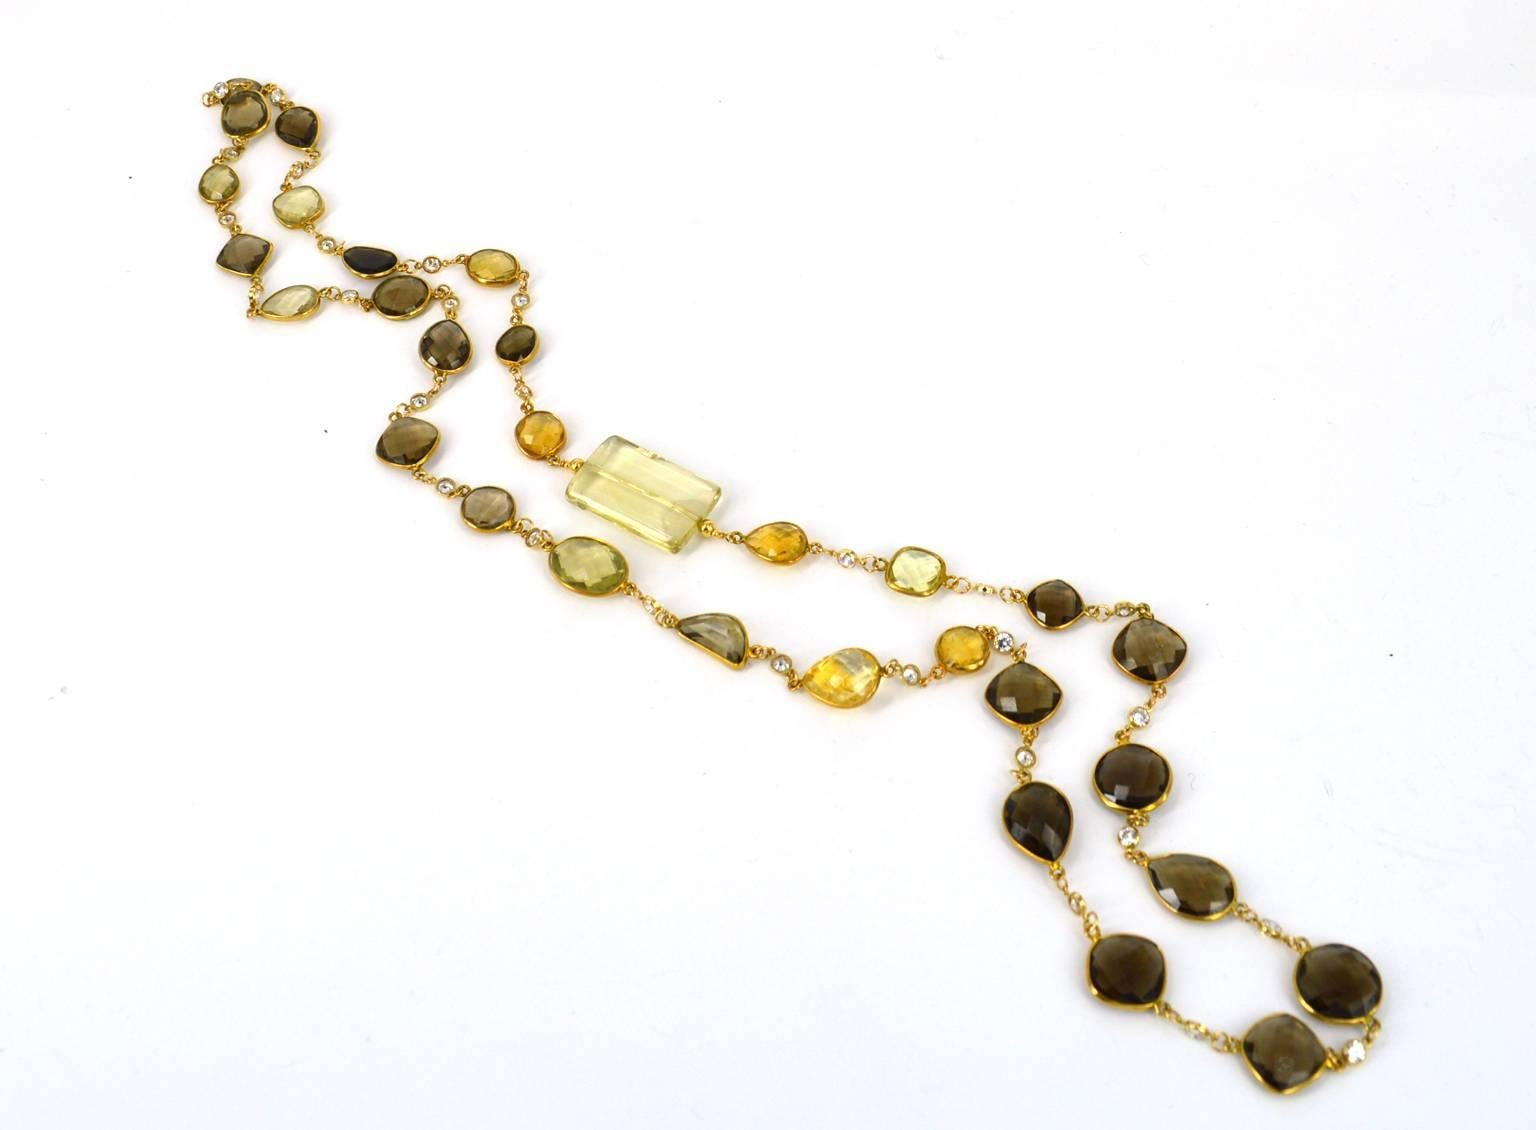 A gorgeous chain of connectors with smokey quartz citrine and lemon quartz. Highlighted with little CZ connectors. 30mm Rectangle Lemon quartz feature bead. Vermeil and 14k gold filled
Total length 102cm so it can be worn double. 